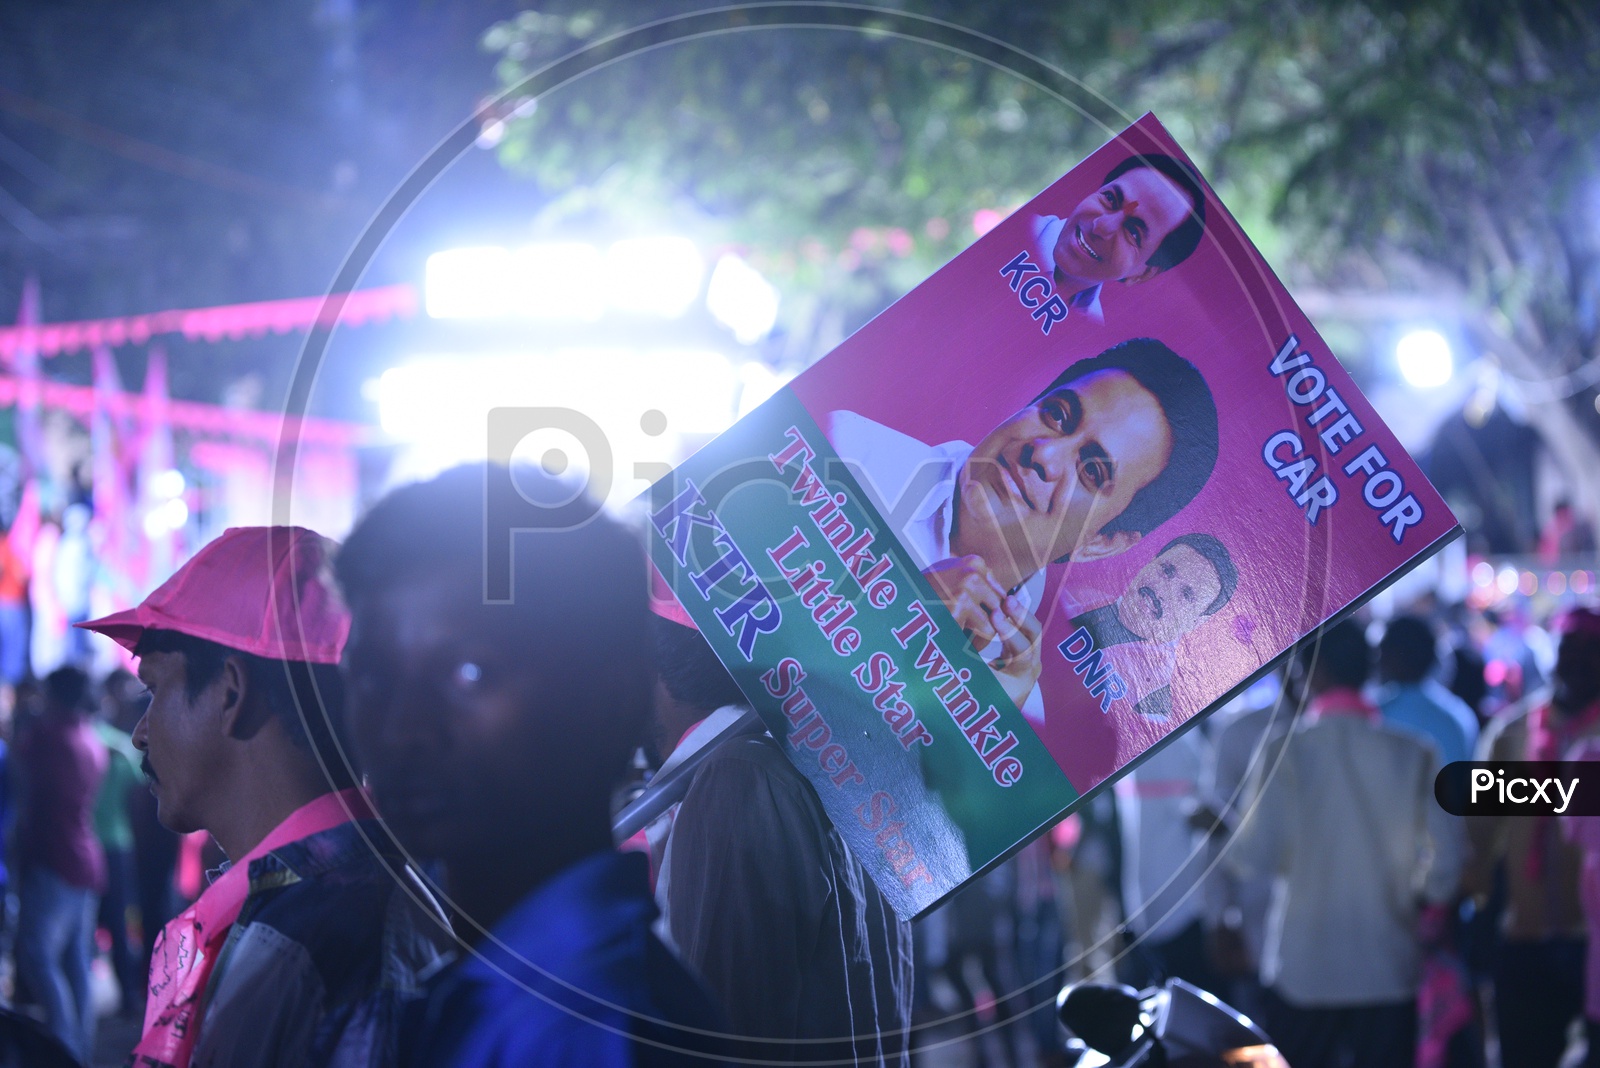 KTR / TRS Party Placards During Election Campaign 2018